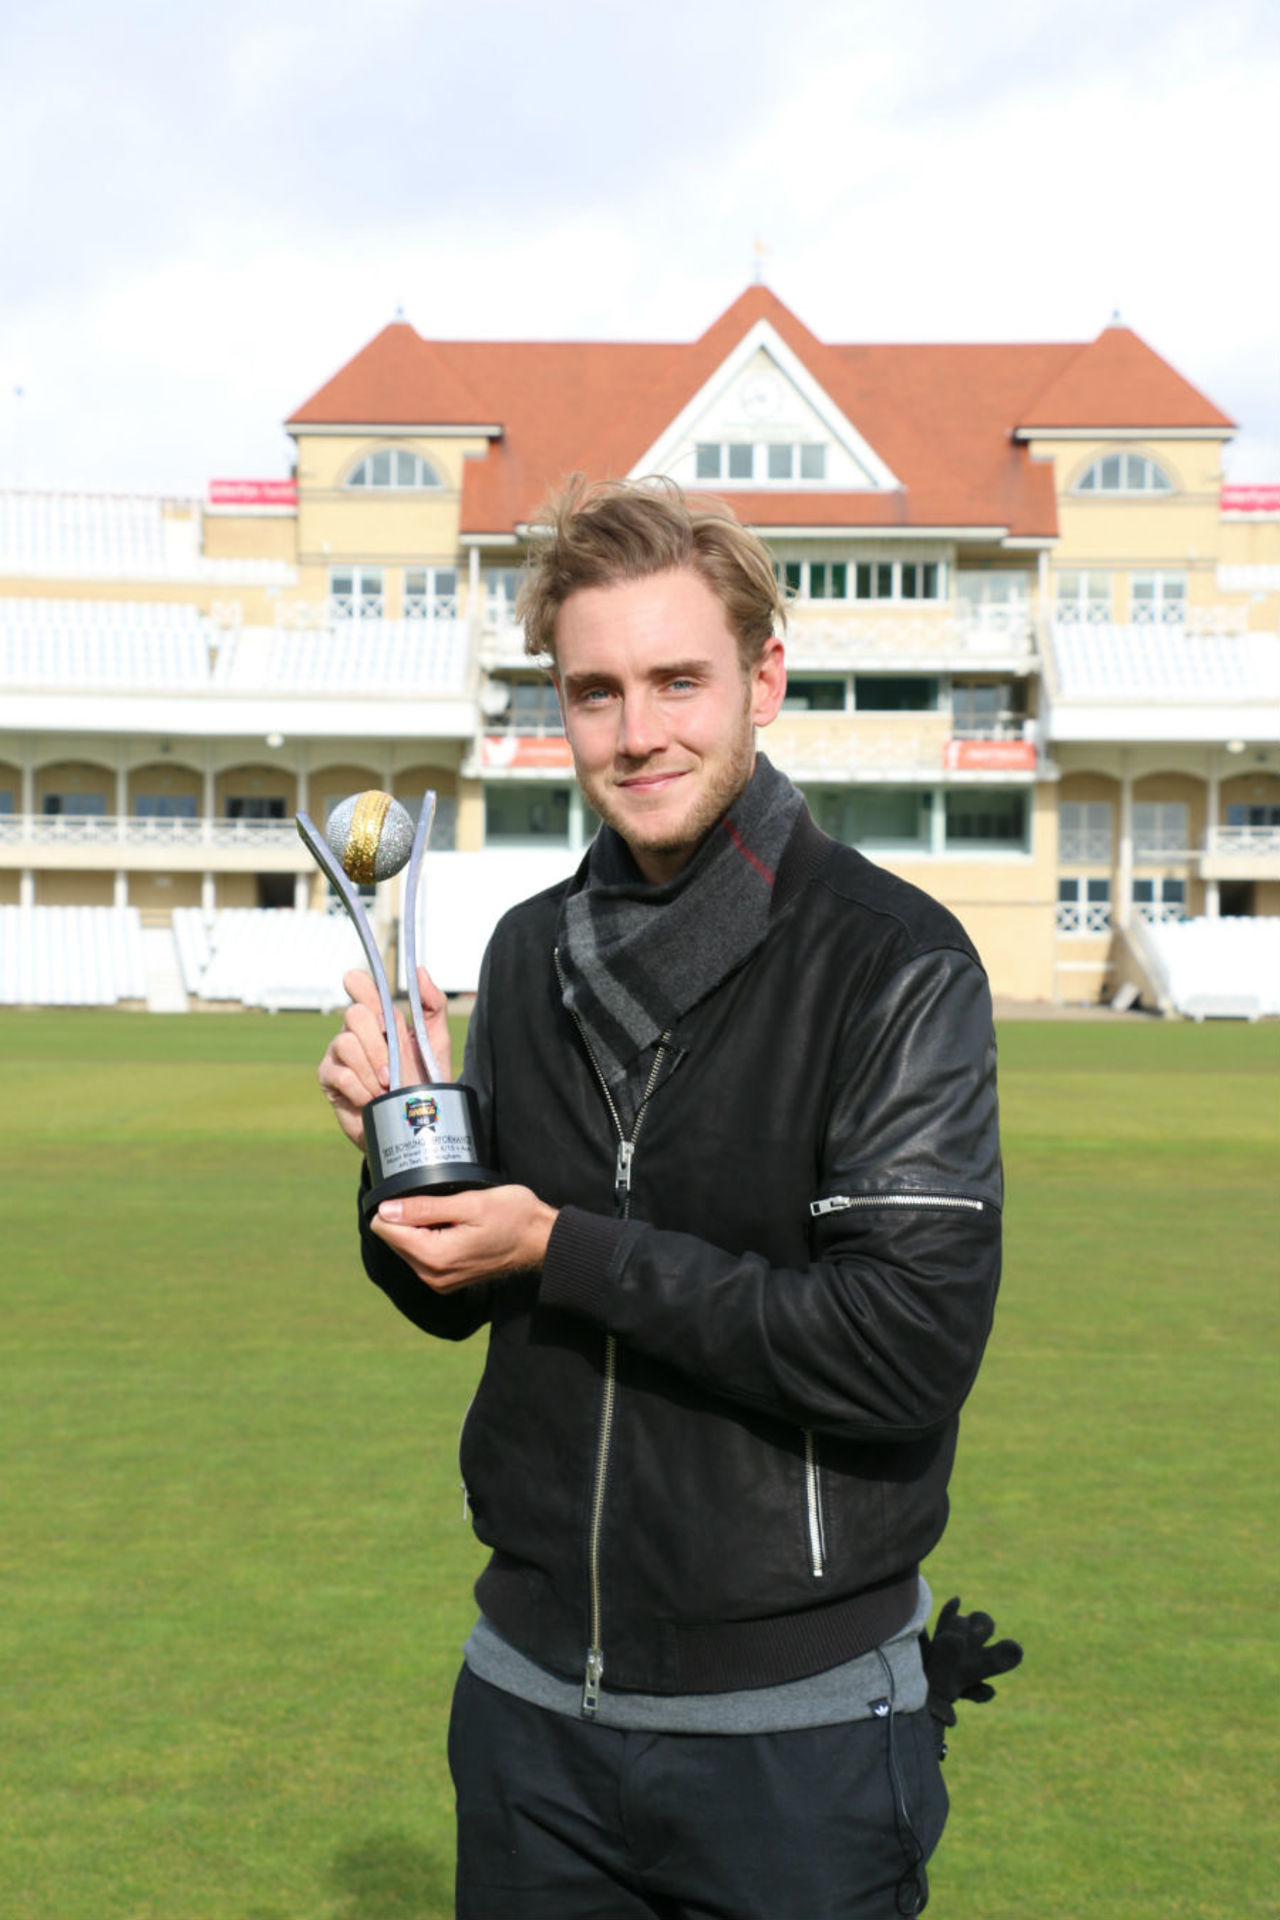 Stuart Broad poses with the trophy after winning ESPNcricinfo's Best Test Bowling Award for 2015, March 14, 2016